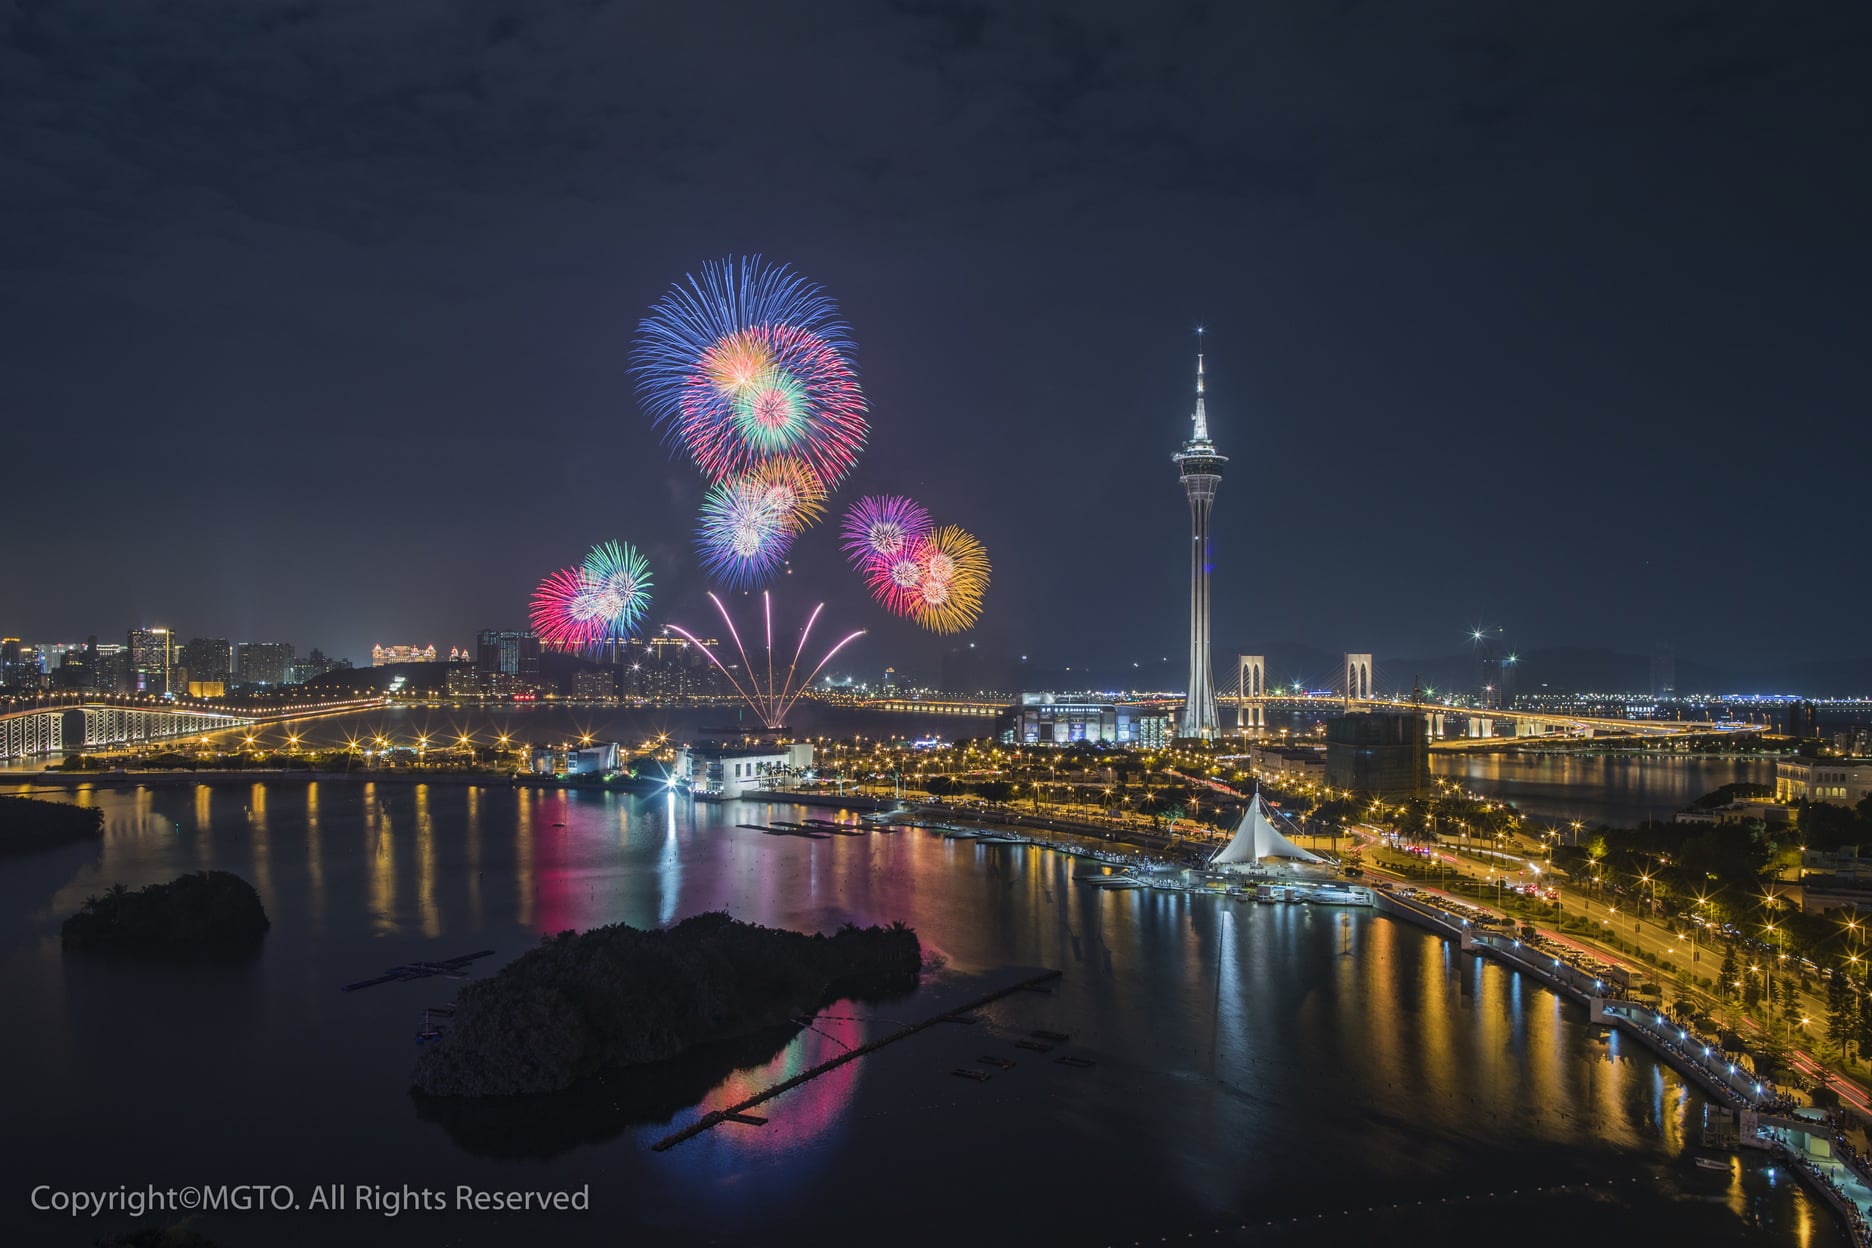 The 29th Macao International Fireworks Display Contest